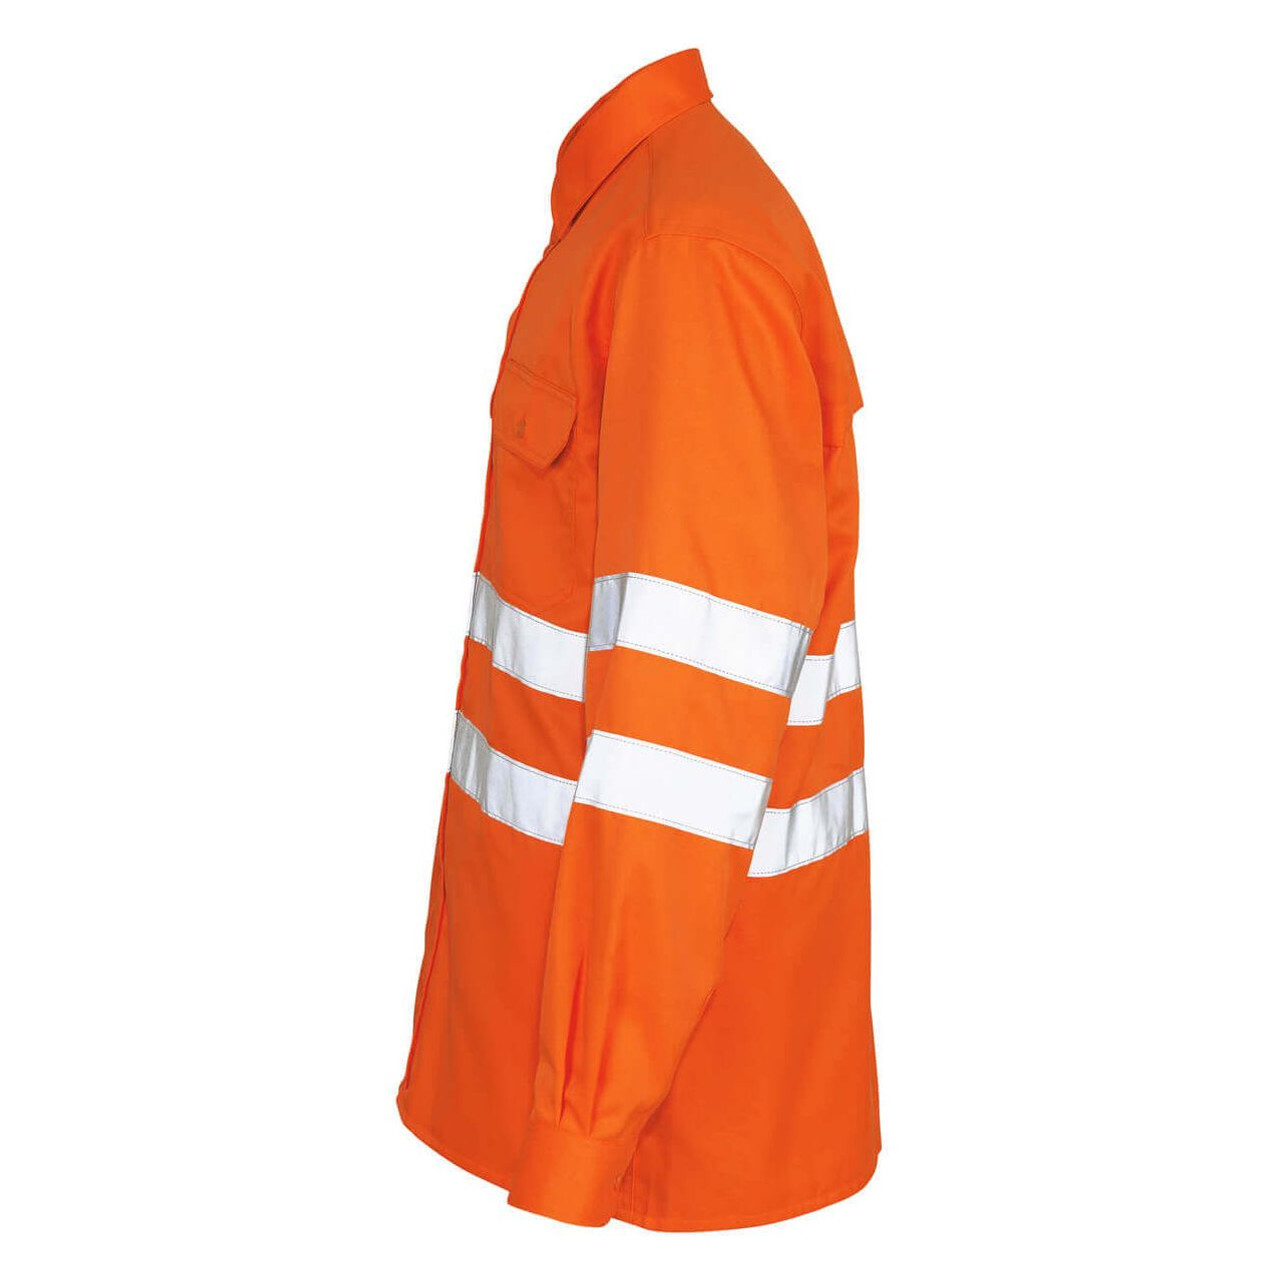 MASCOT Shirt | 06004 High Vis Orange Shirt with Reflective Tape in Durable Poly/Cotton Blend